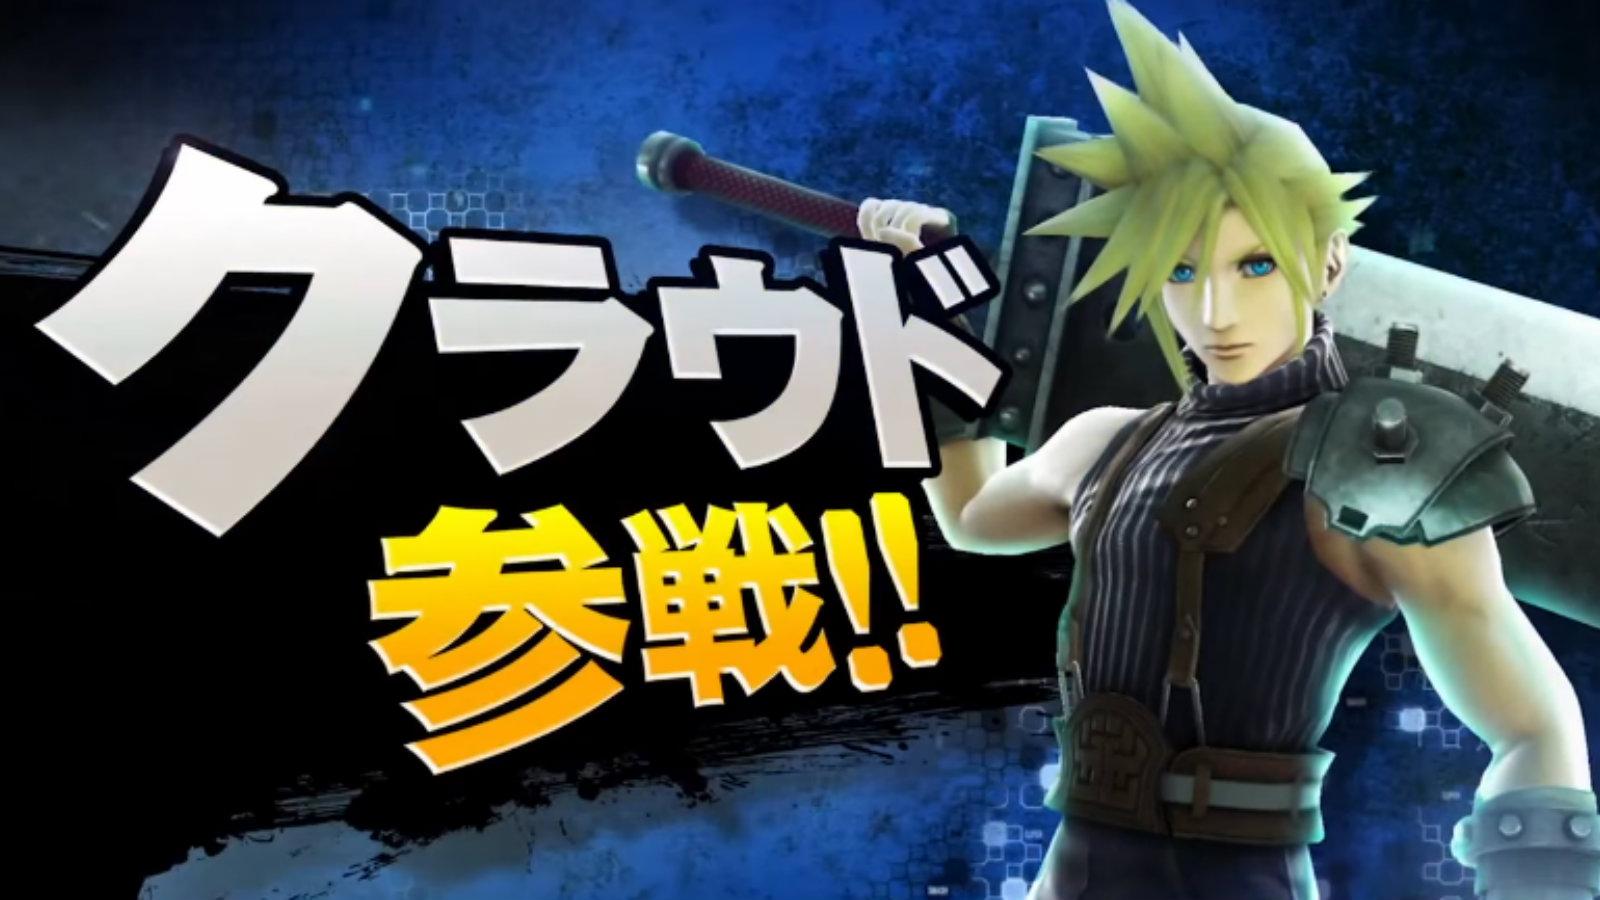 Cloud when he was revealed for Smash 4